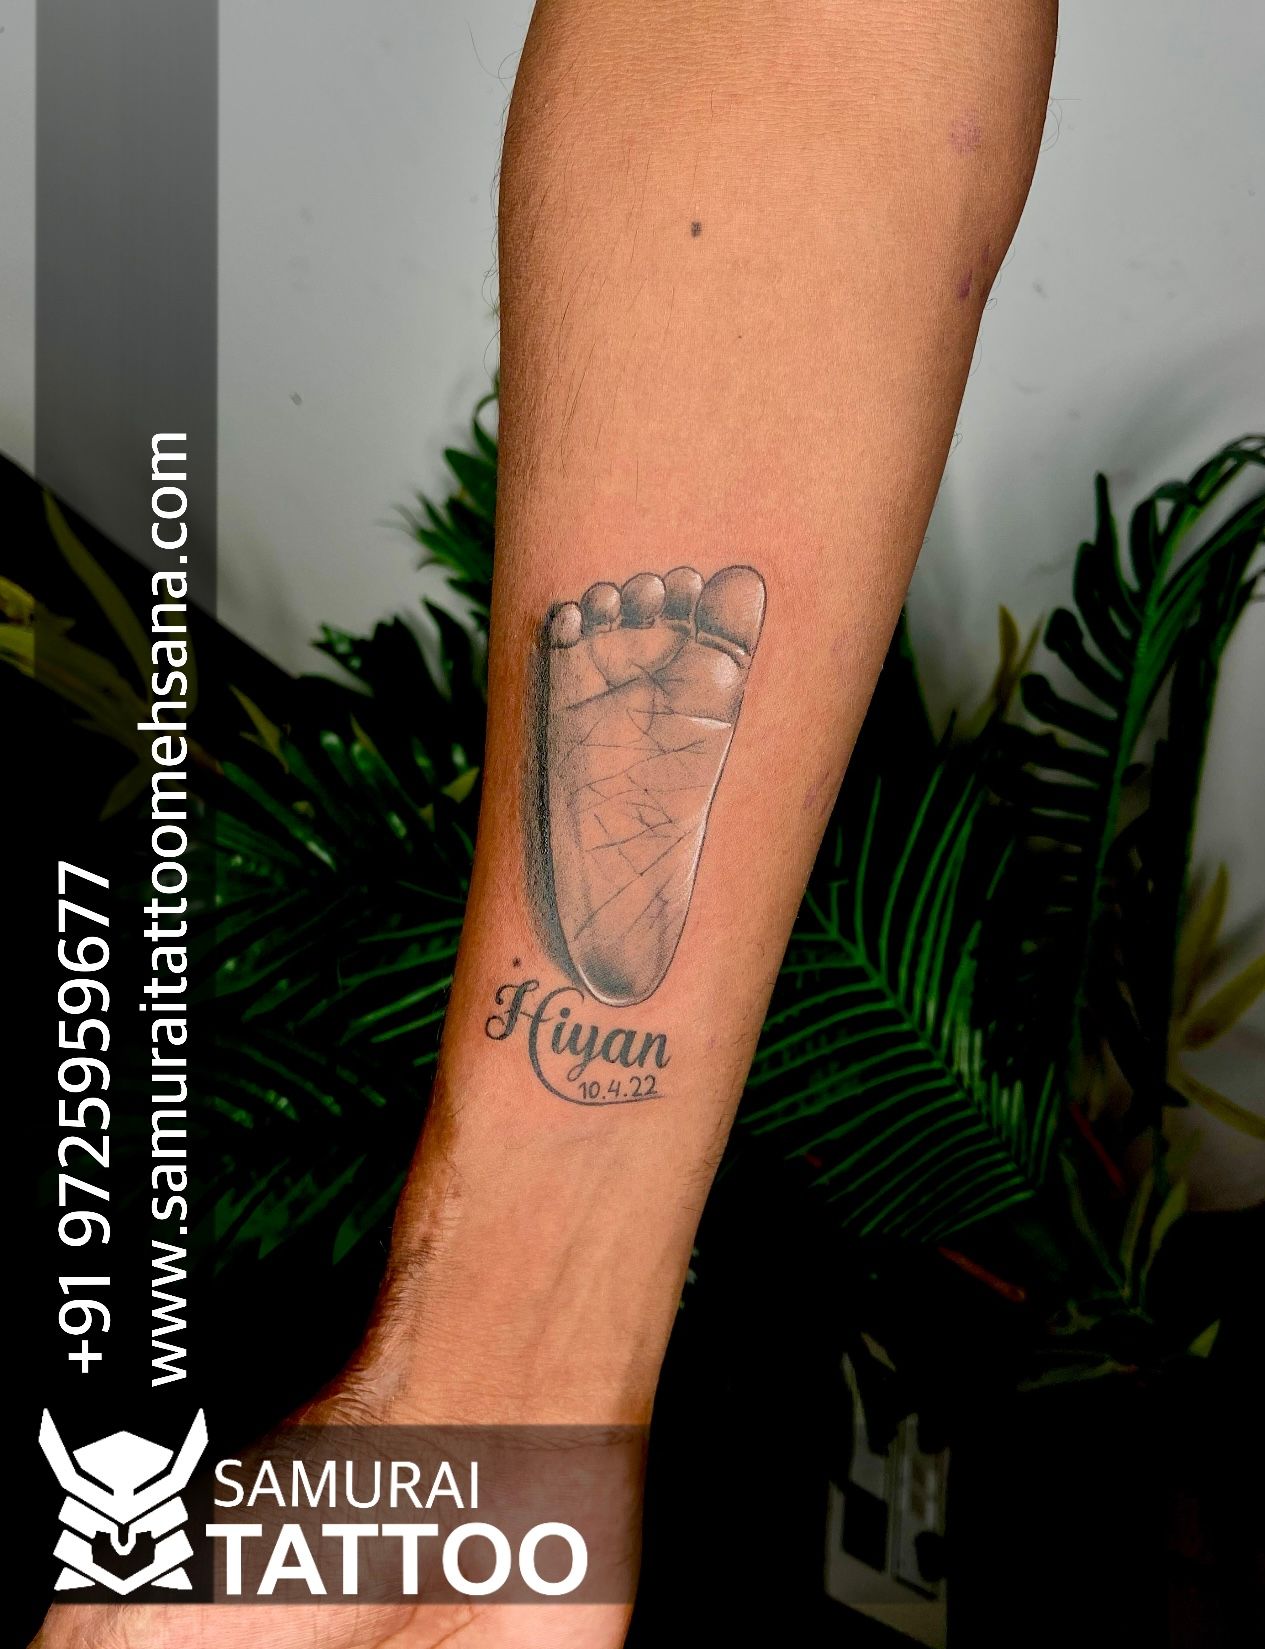 Share 80 about baby leg tattoo super cool  indaotaonec